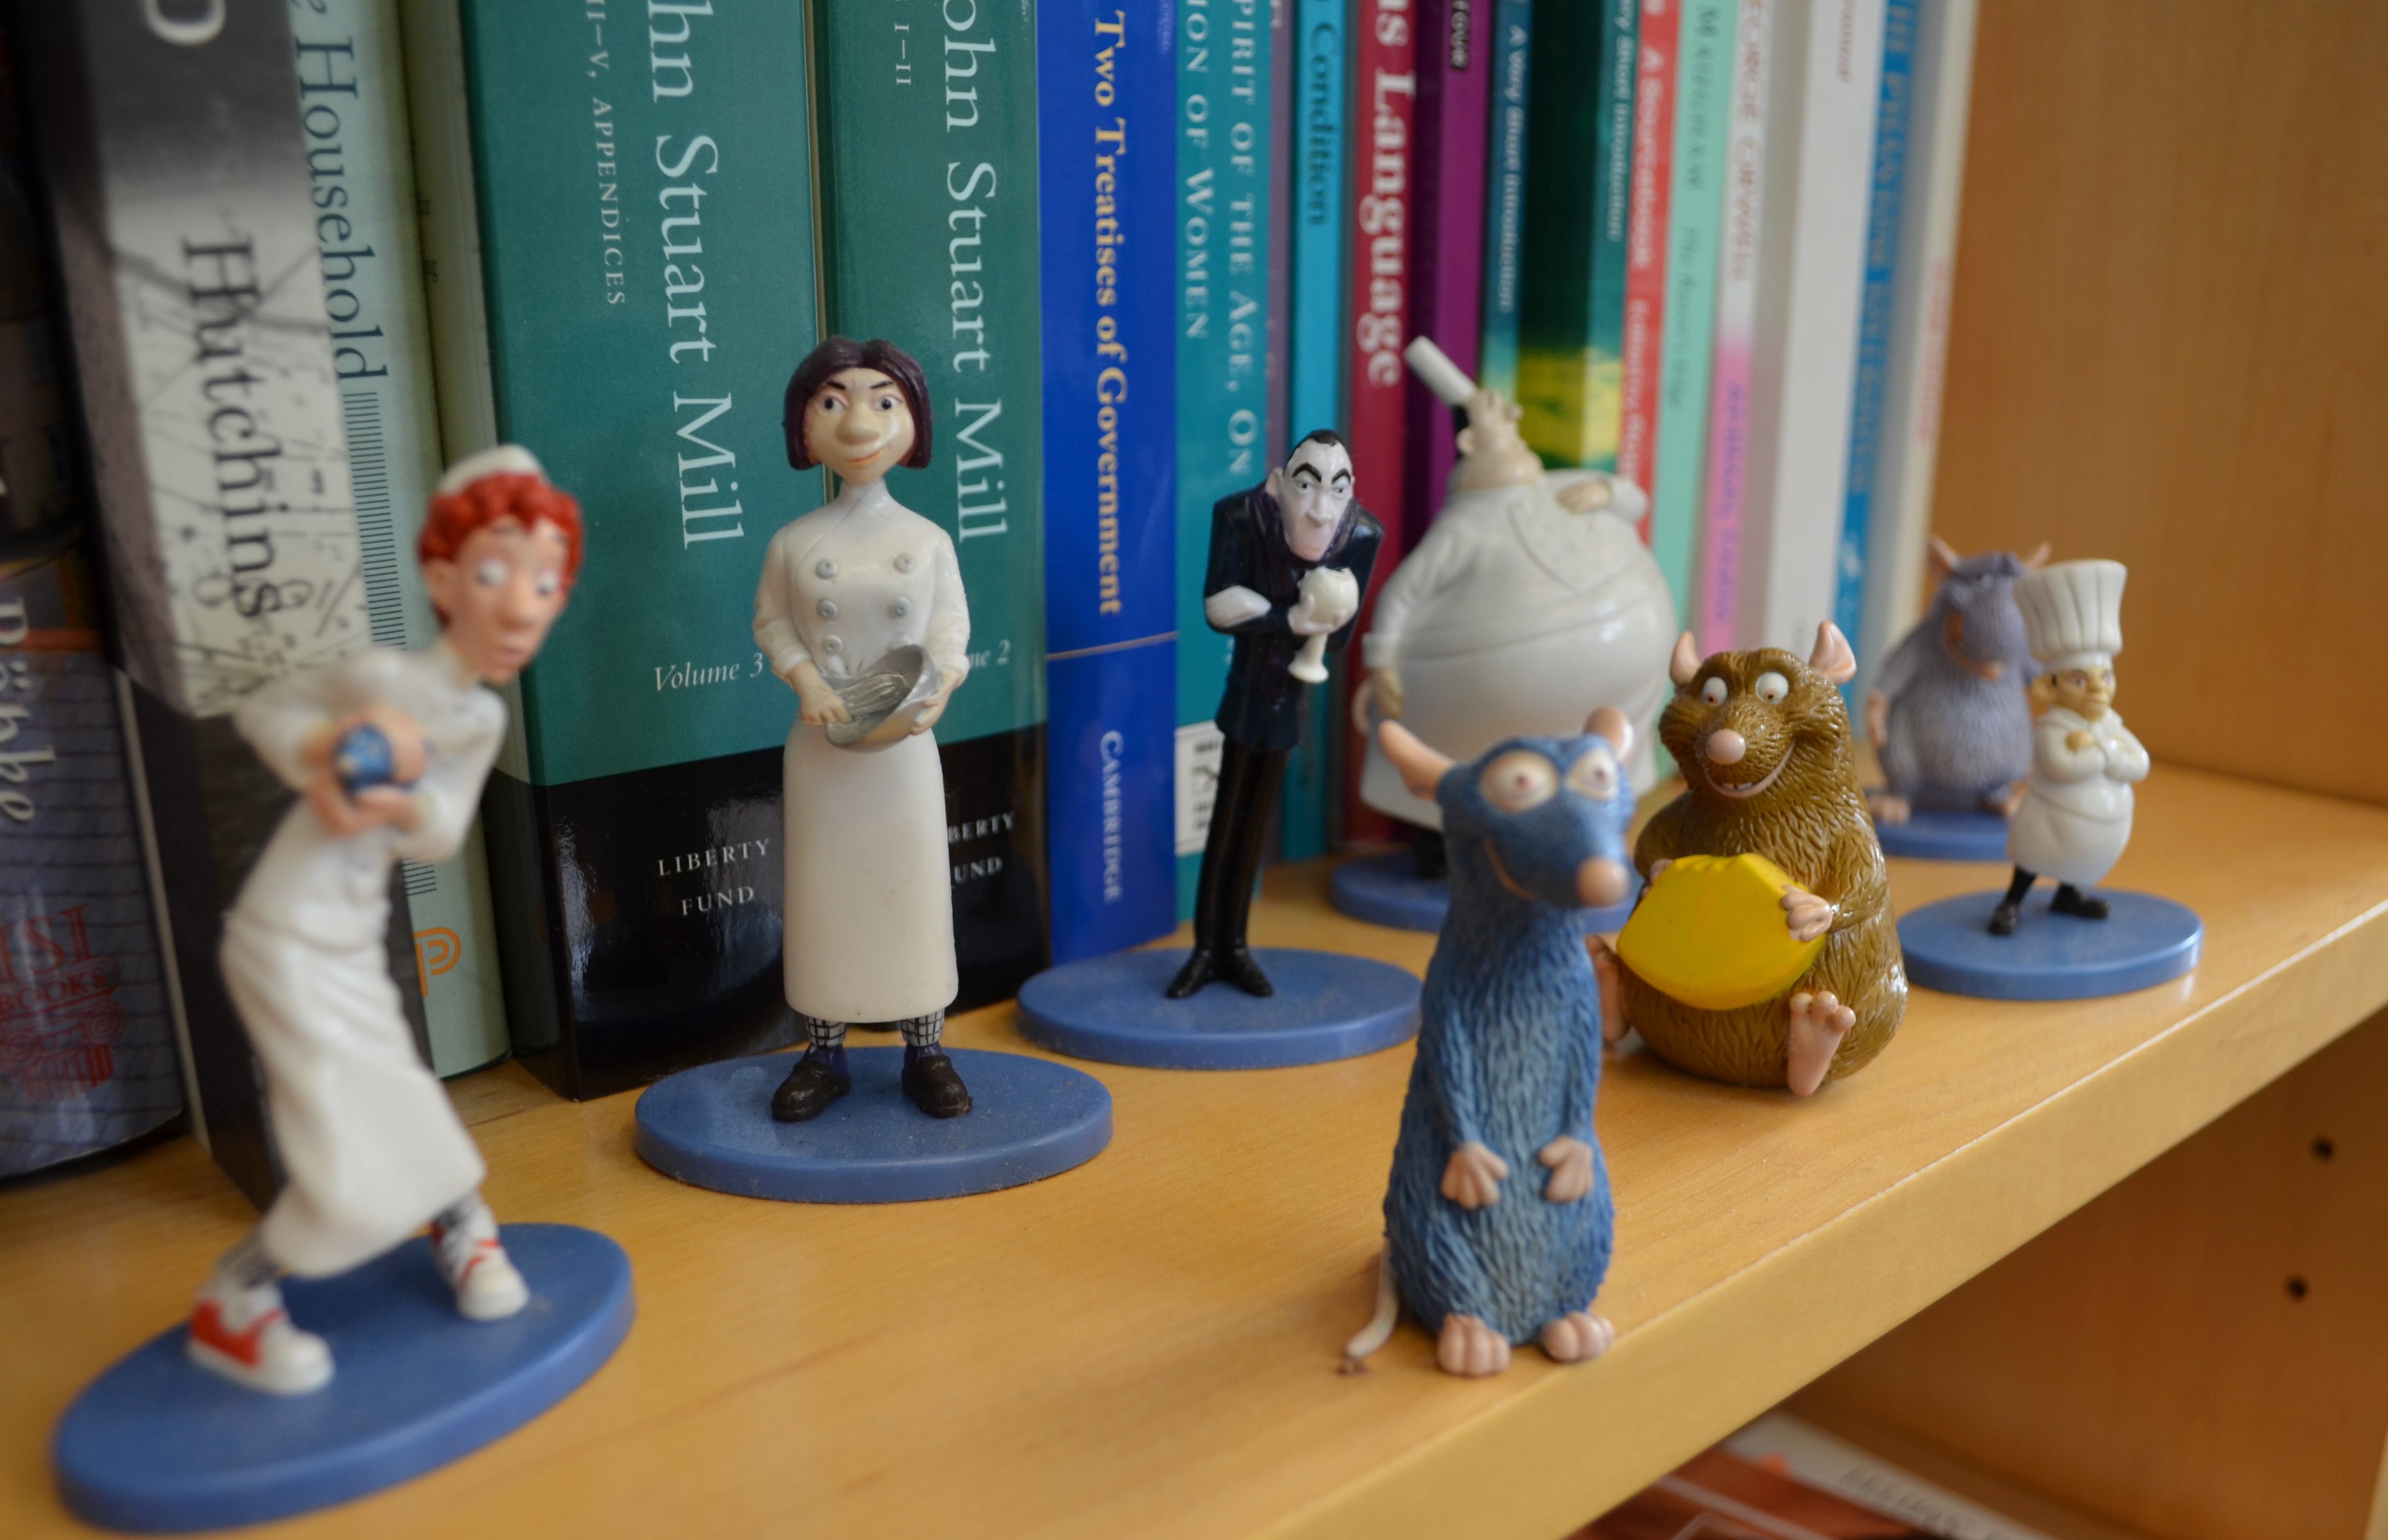 The culinary crew is all there, keeping good company with John Stuart Mill and John Locke.